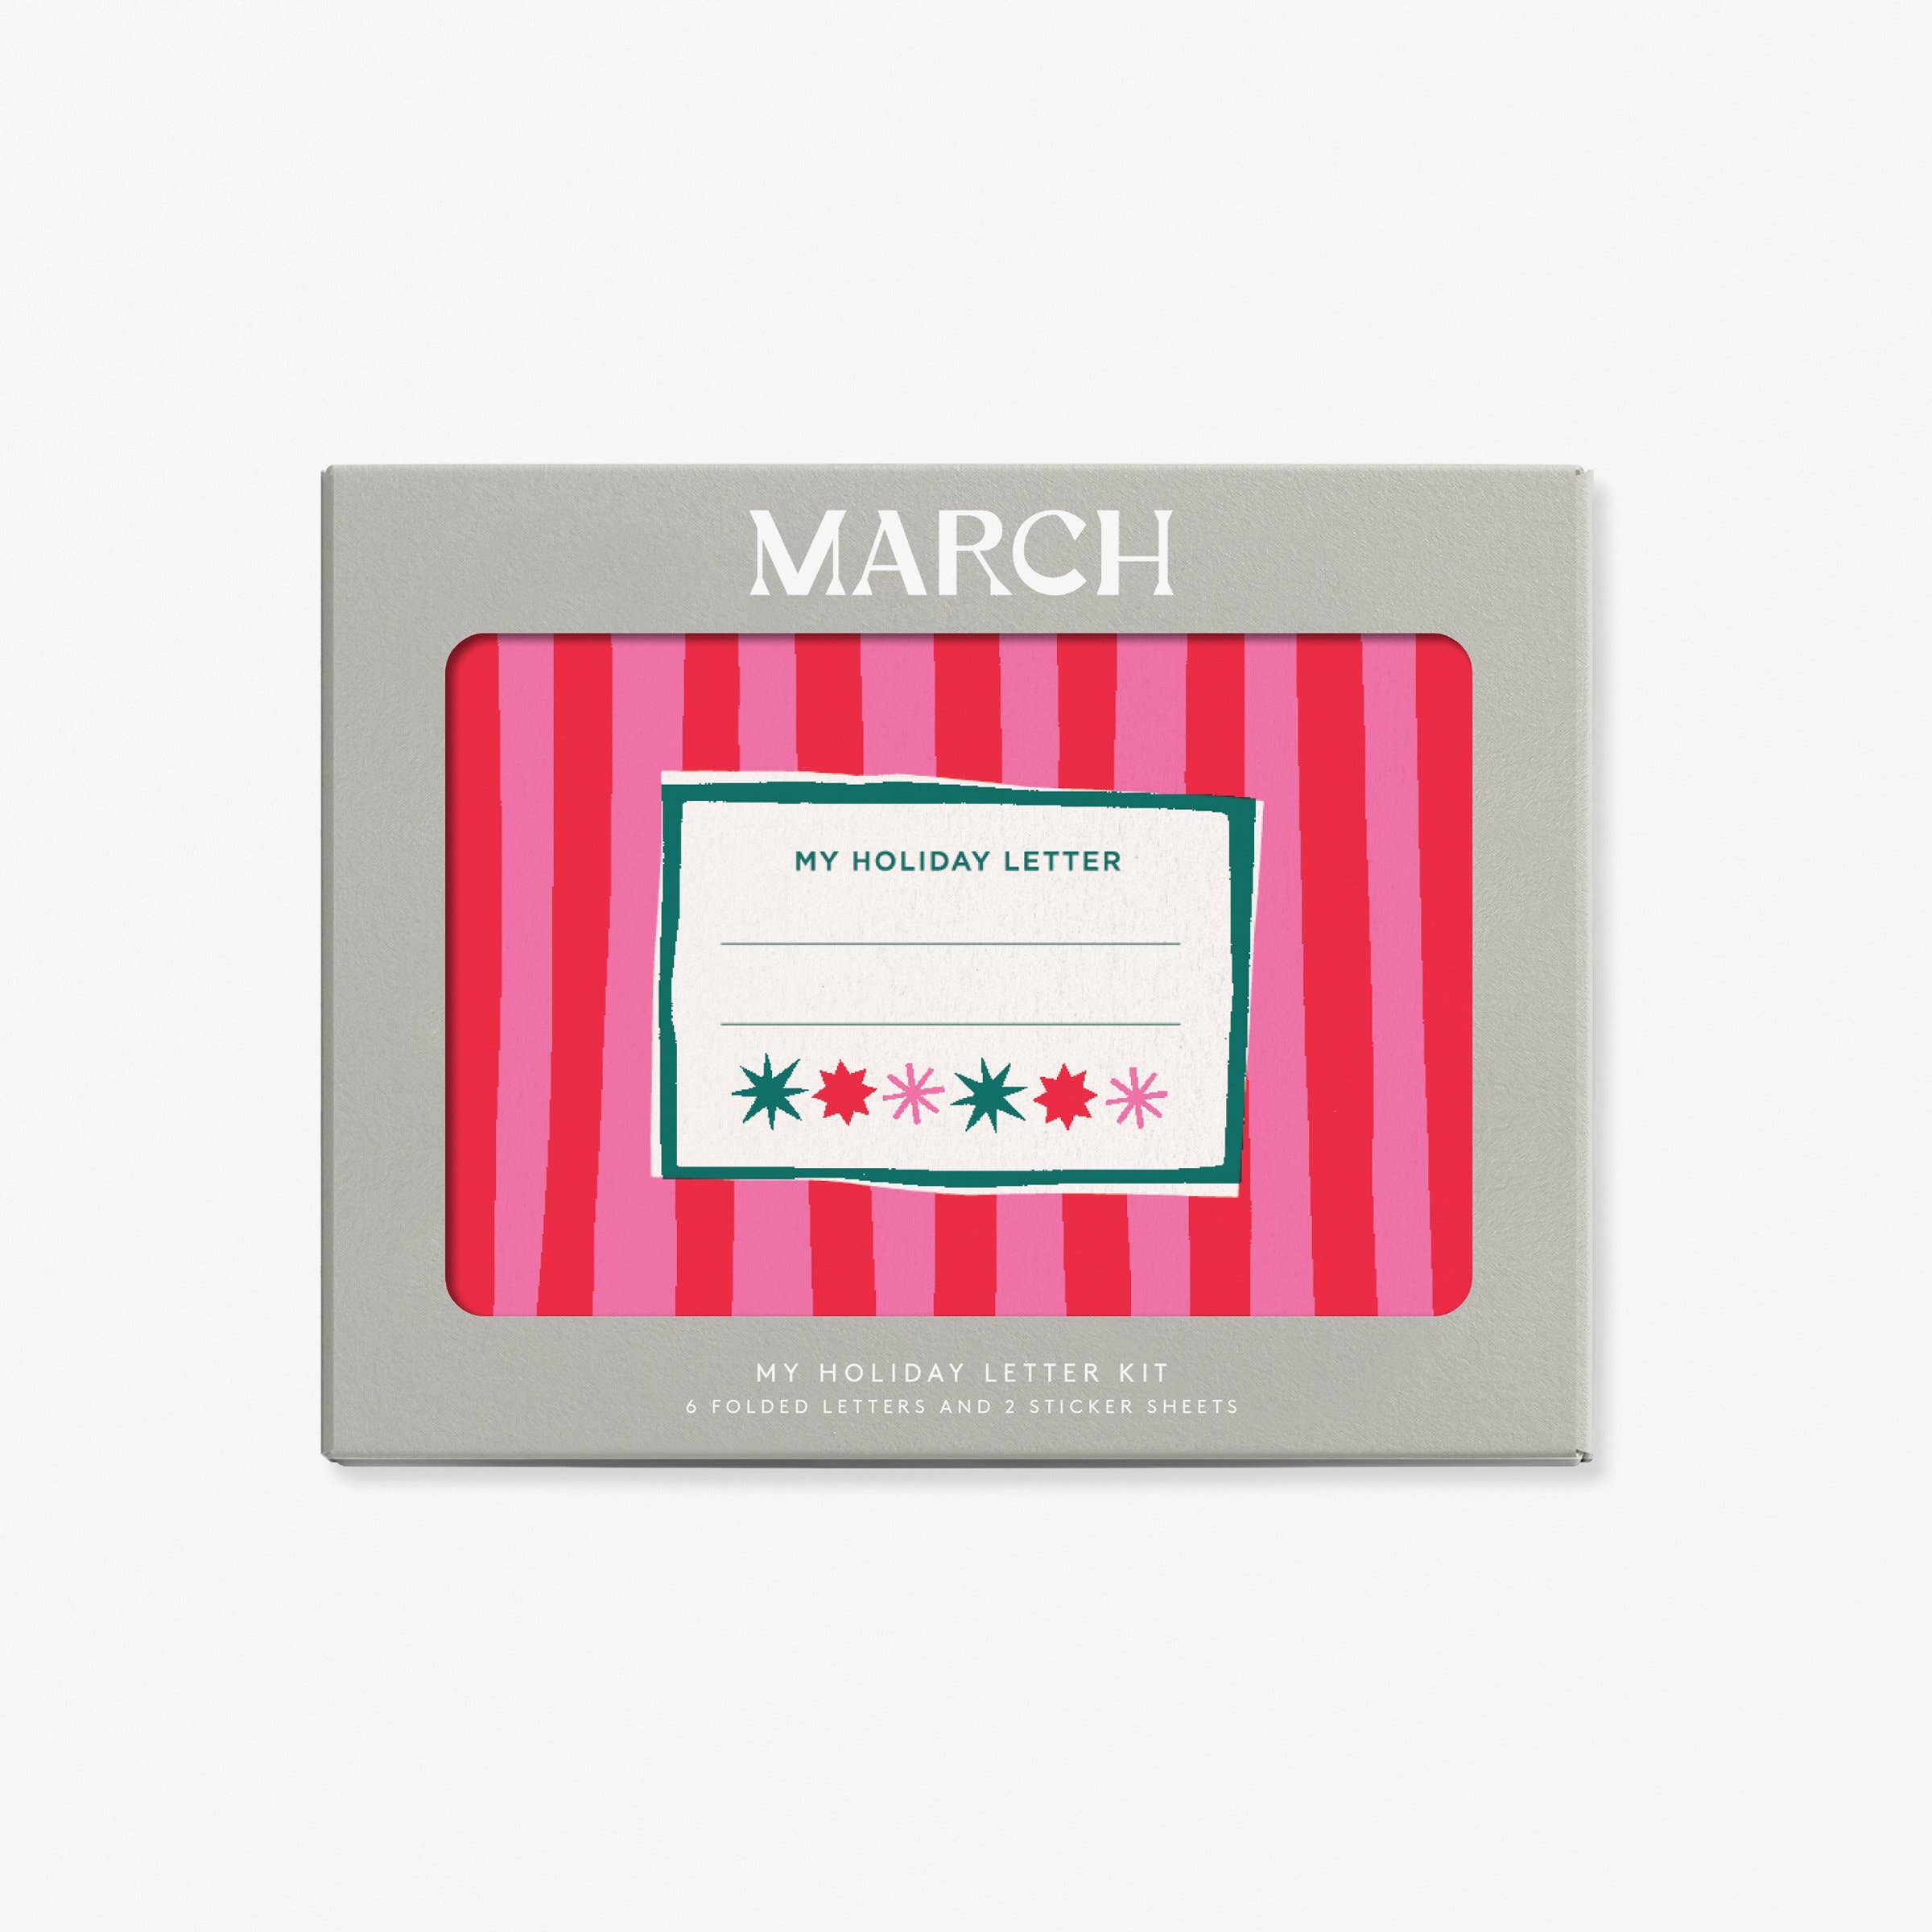 Alpha Gift Wrap — March Party Goods